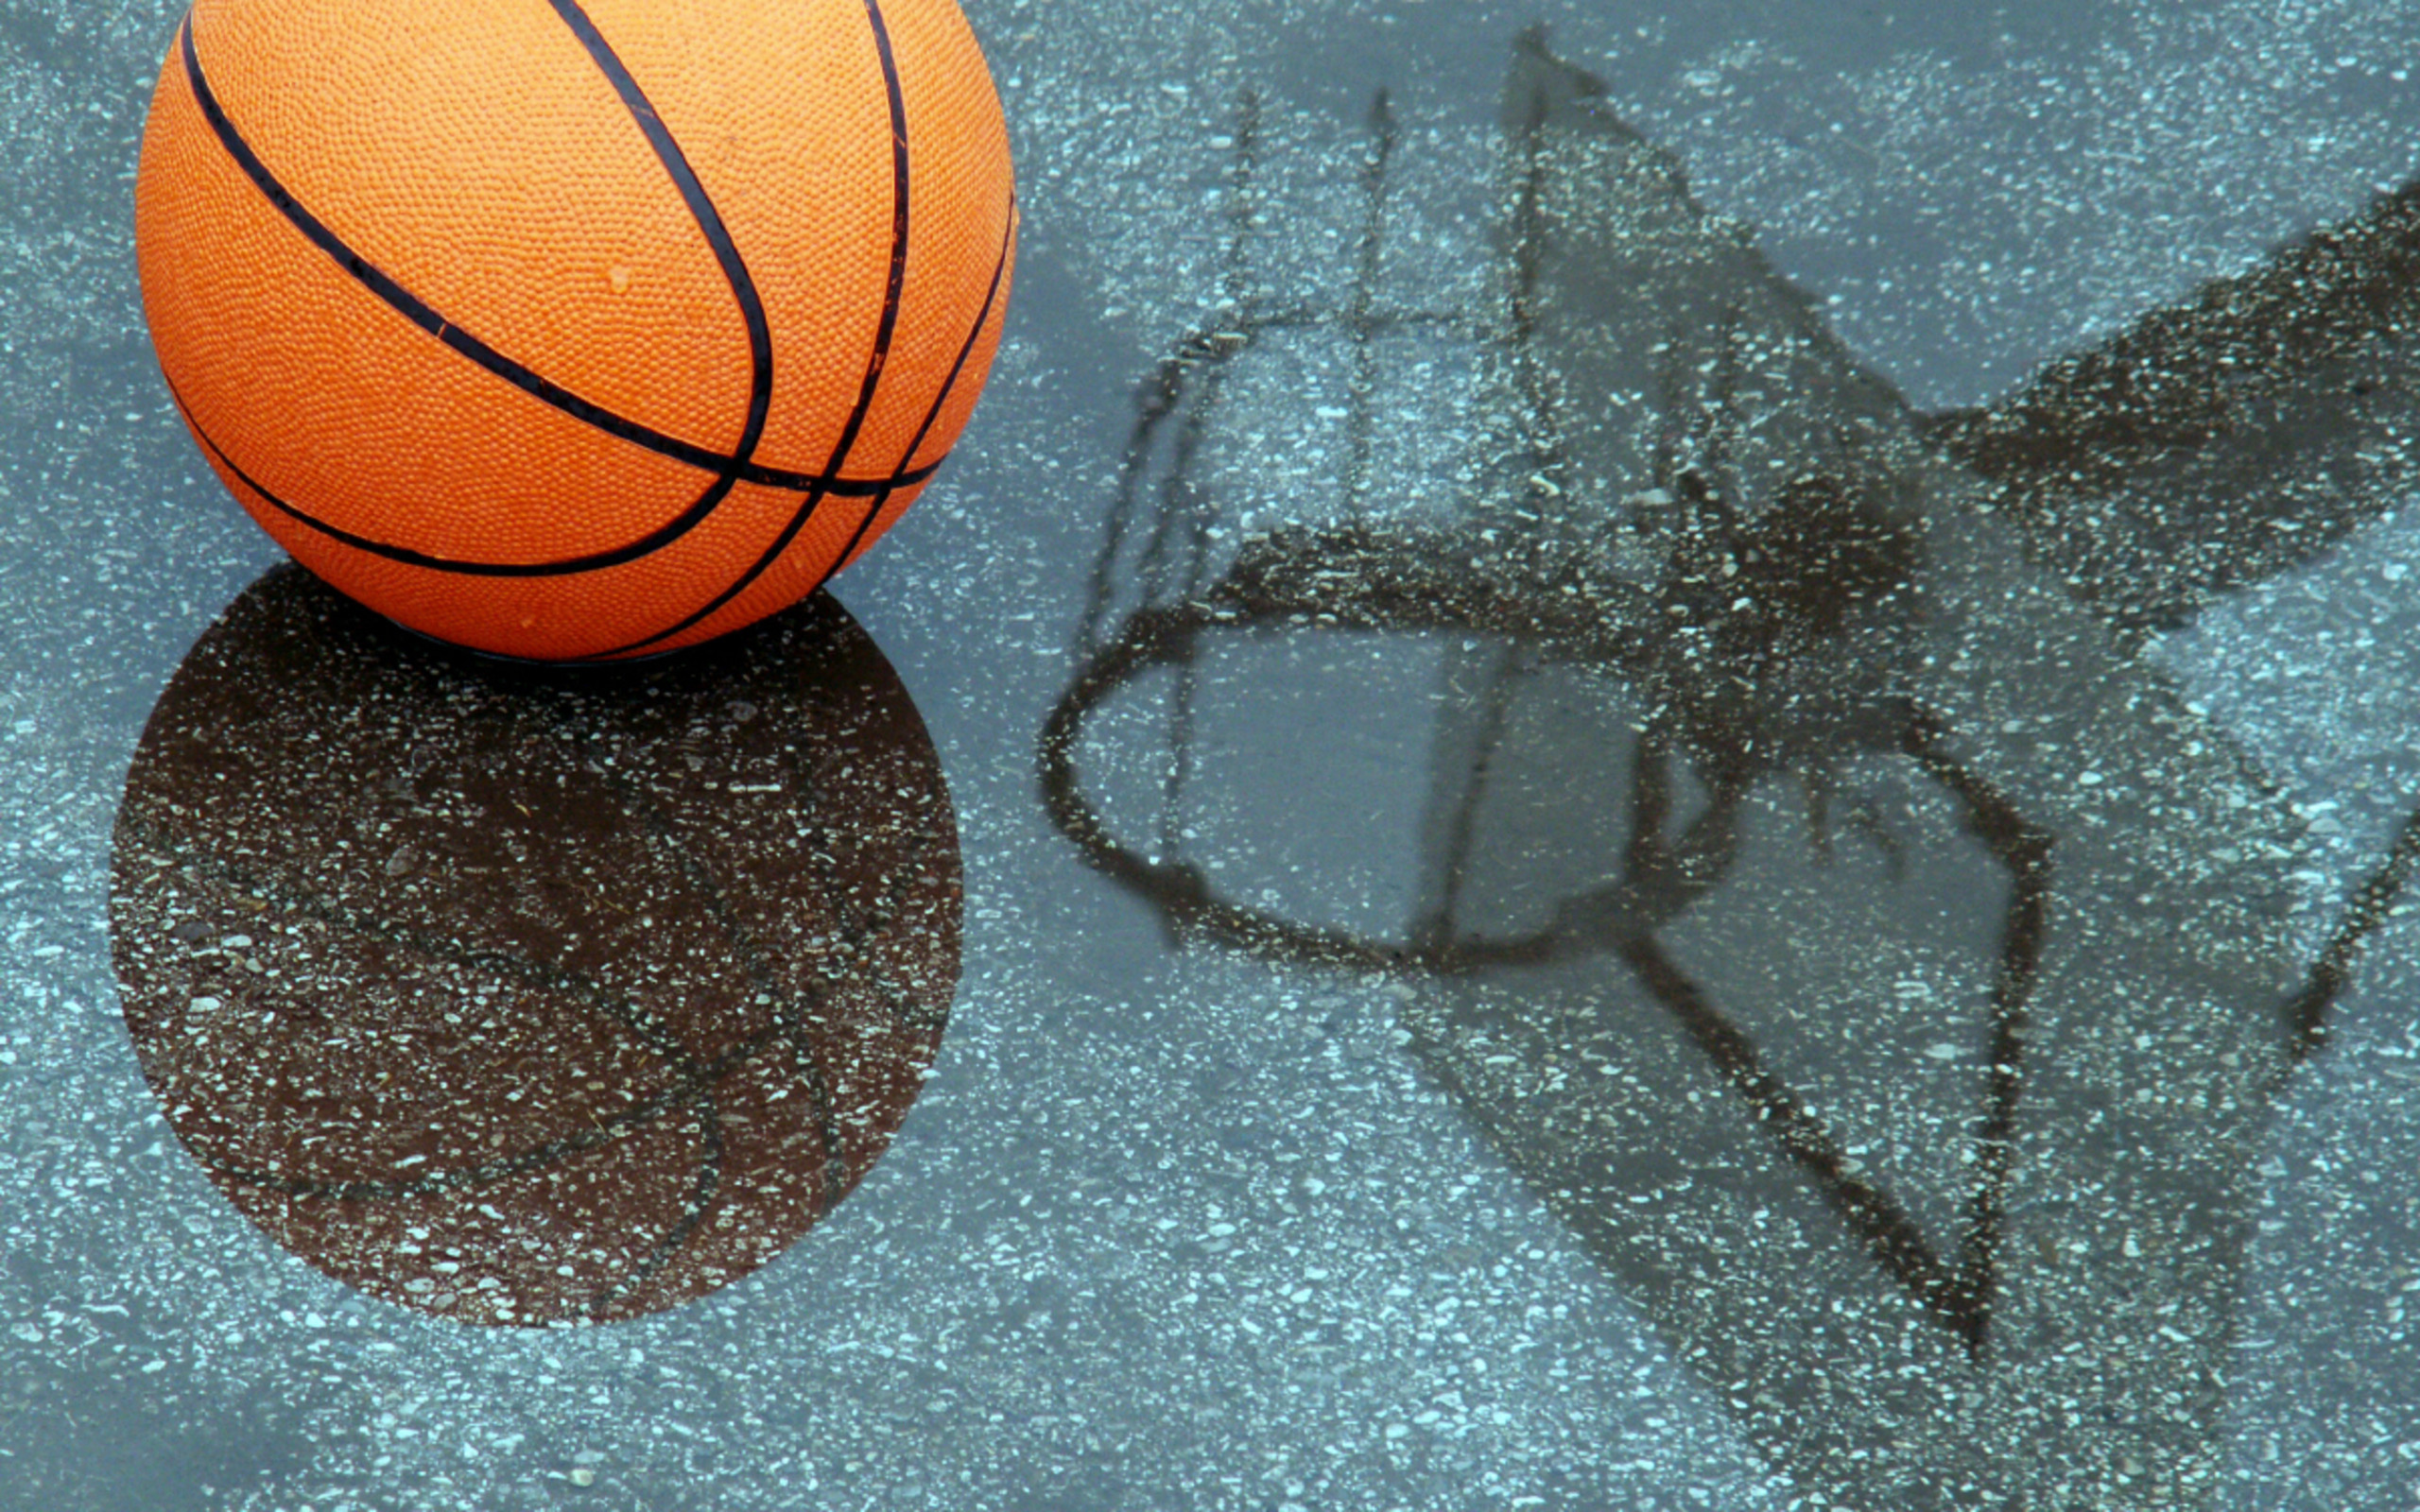 2560x1600 Awesome Basketball Court Wallpaper.